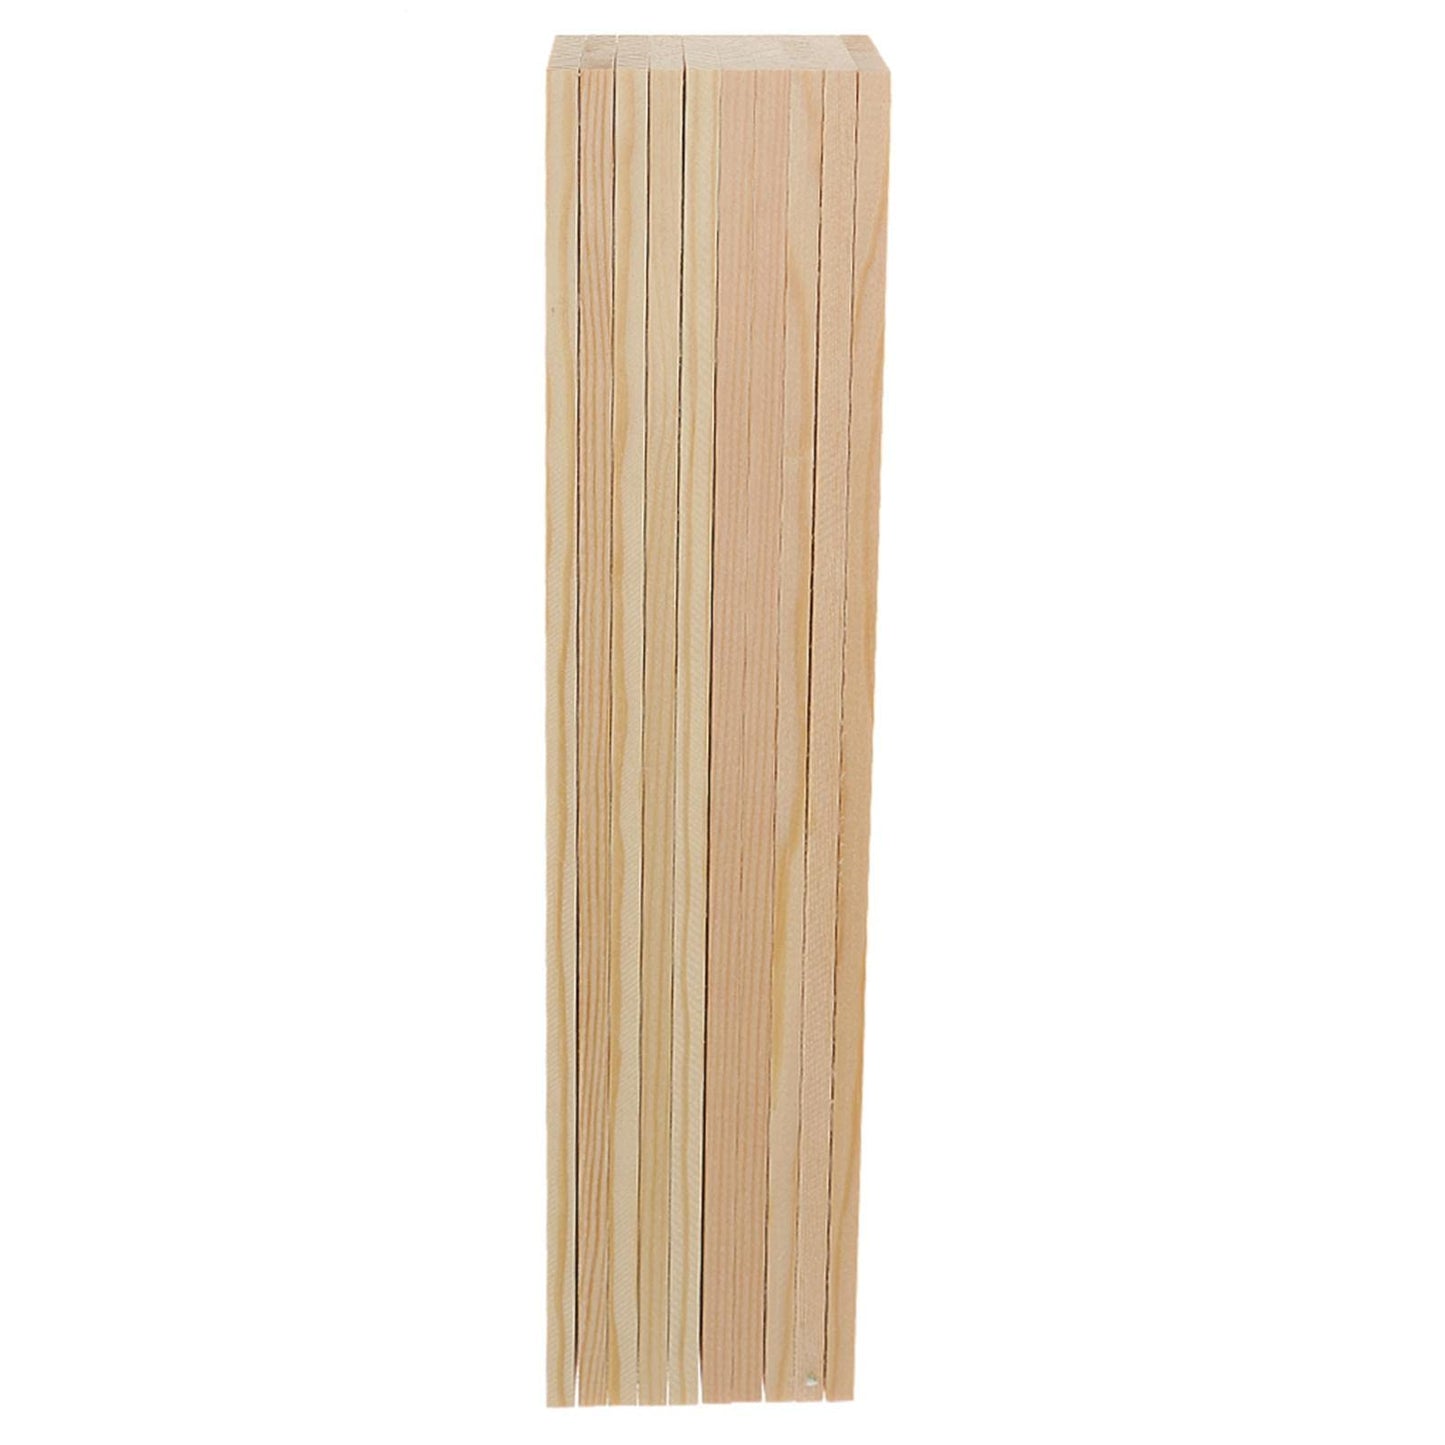 misppro 10 Pieces Blank Natural Pine Wood Rectangle Boards Panels Wooden Pieces for Art Crafts - 30cm